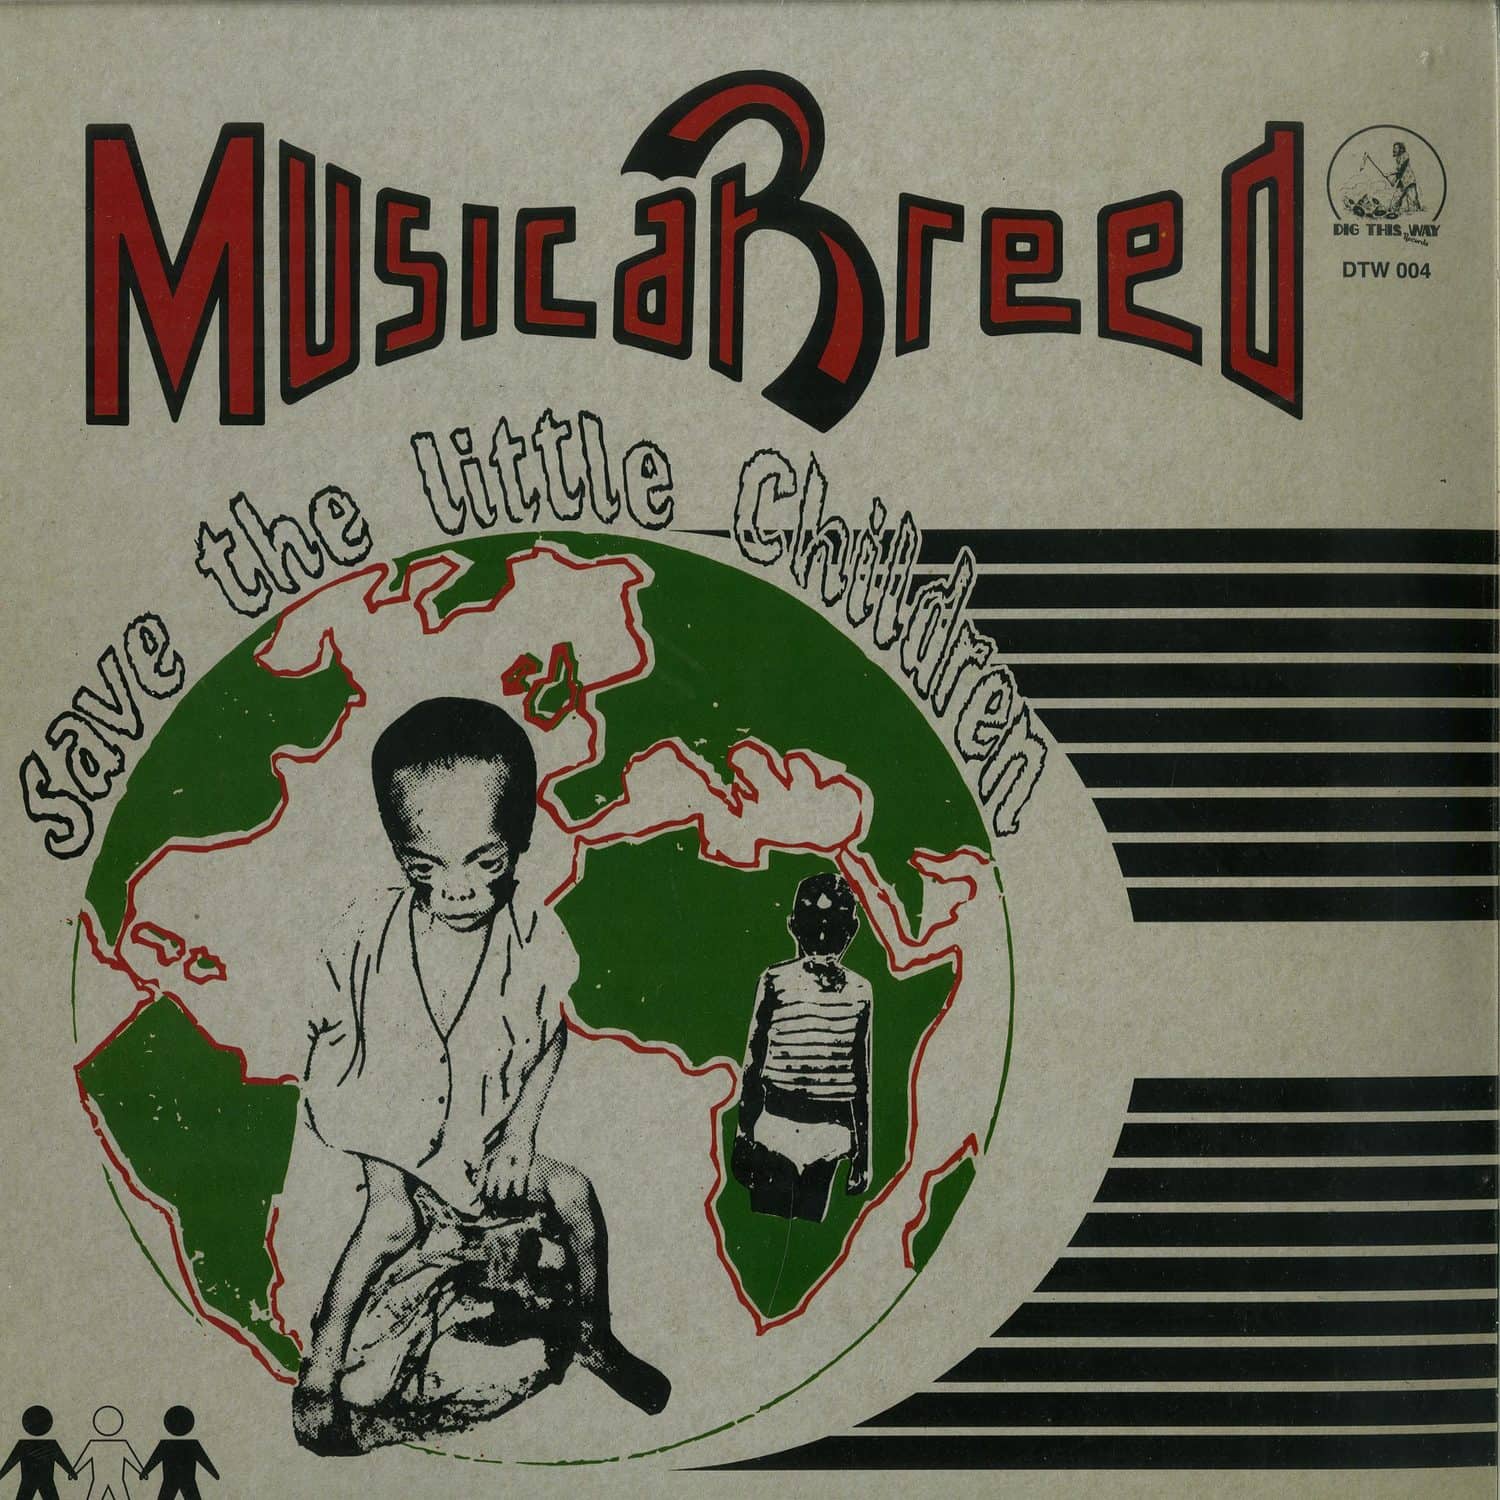 Musical Breed - SAVE THE LITTLE CHILDREN 